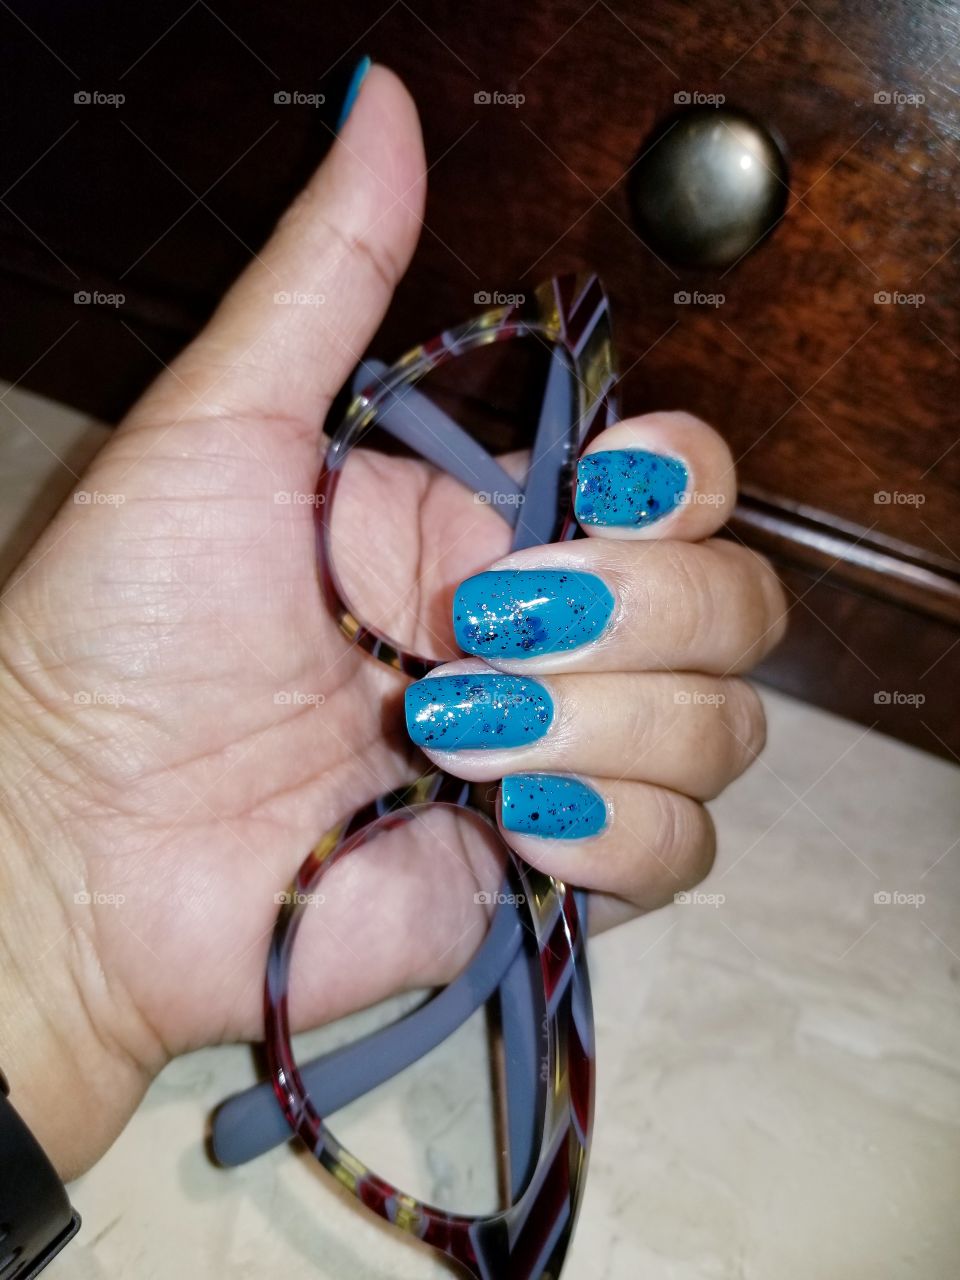 Teal Christmas manicure